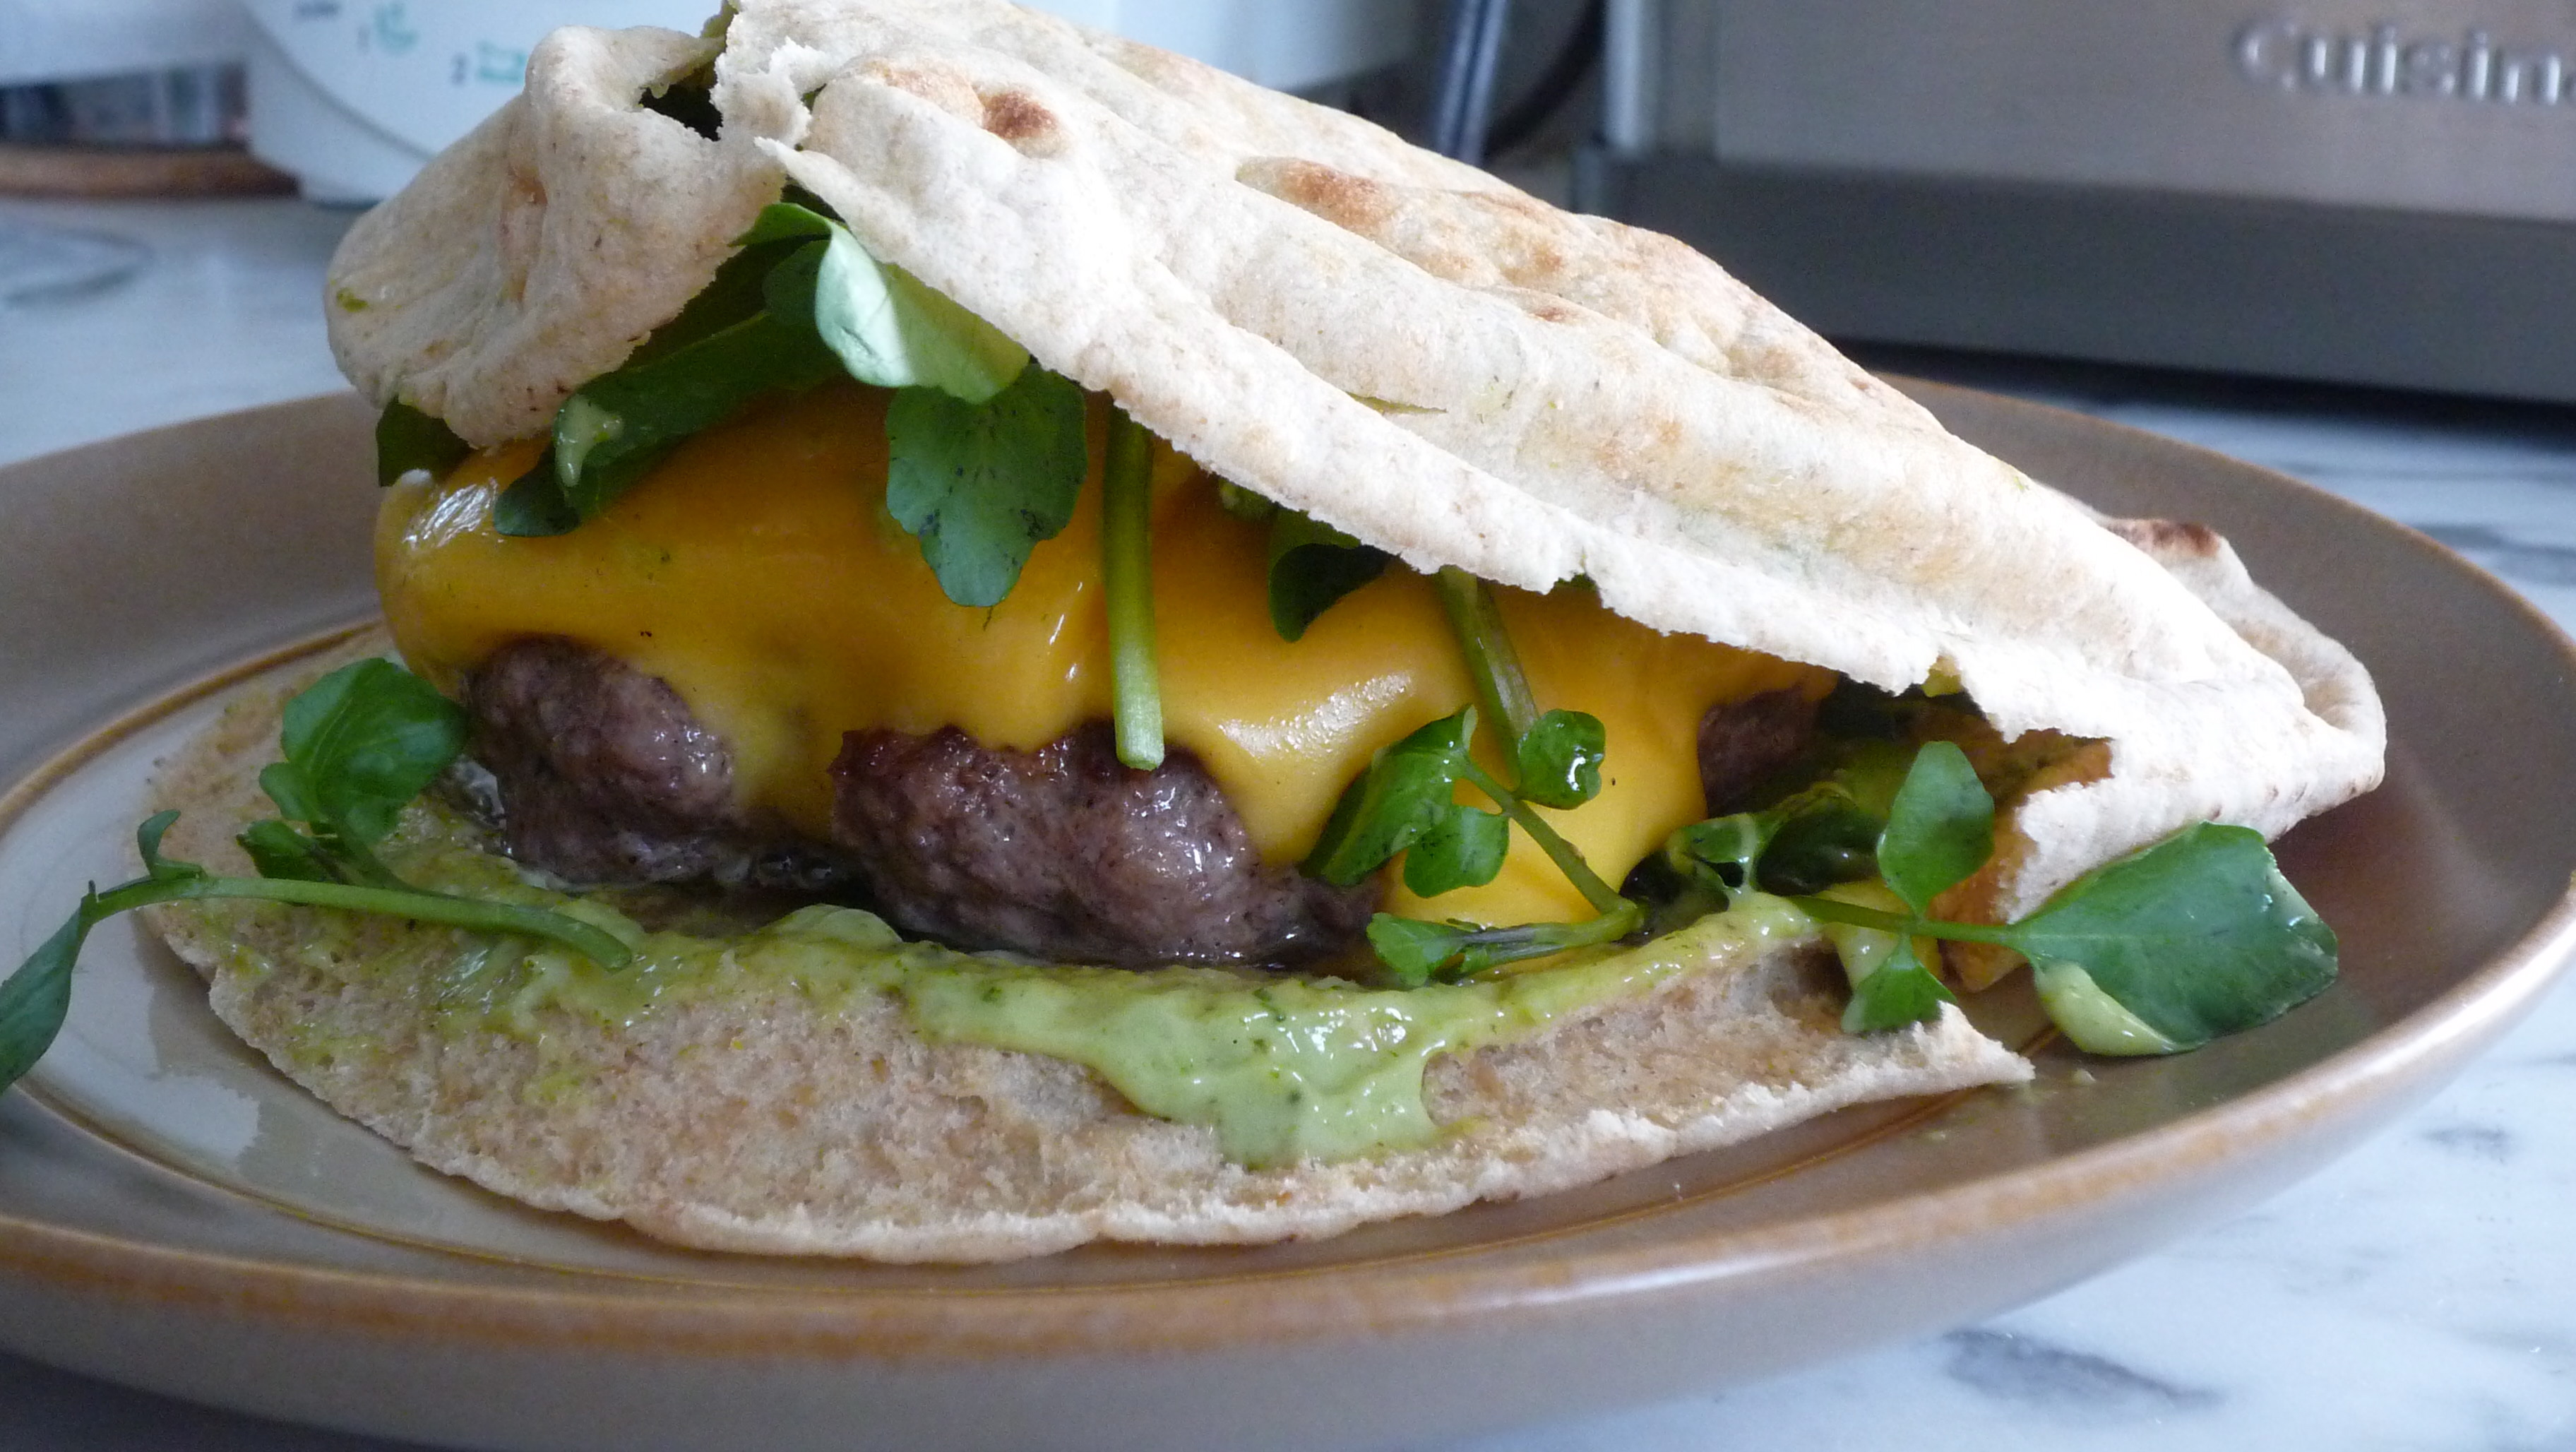 Cheeseburger with arugula topped with pesto mayonnaise in a low carb pita